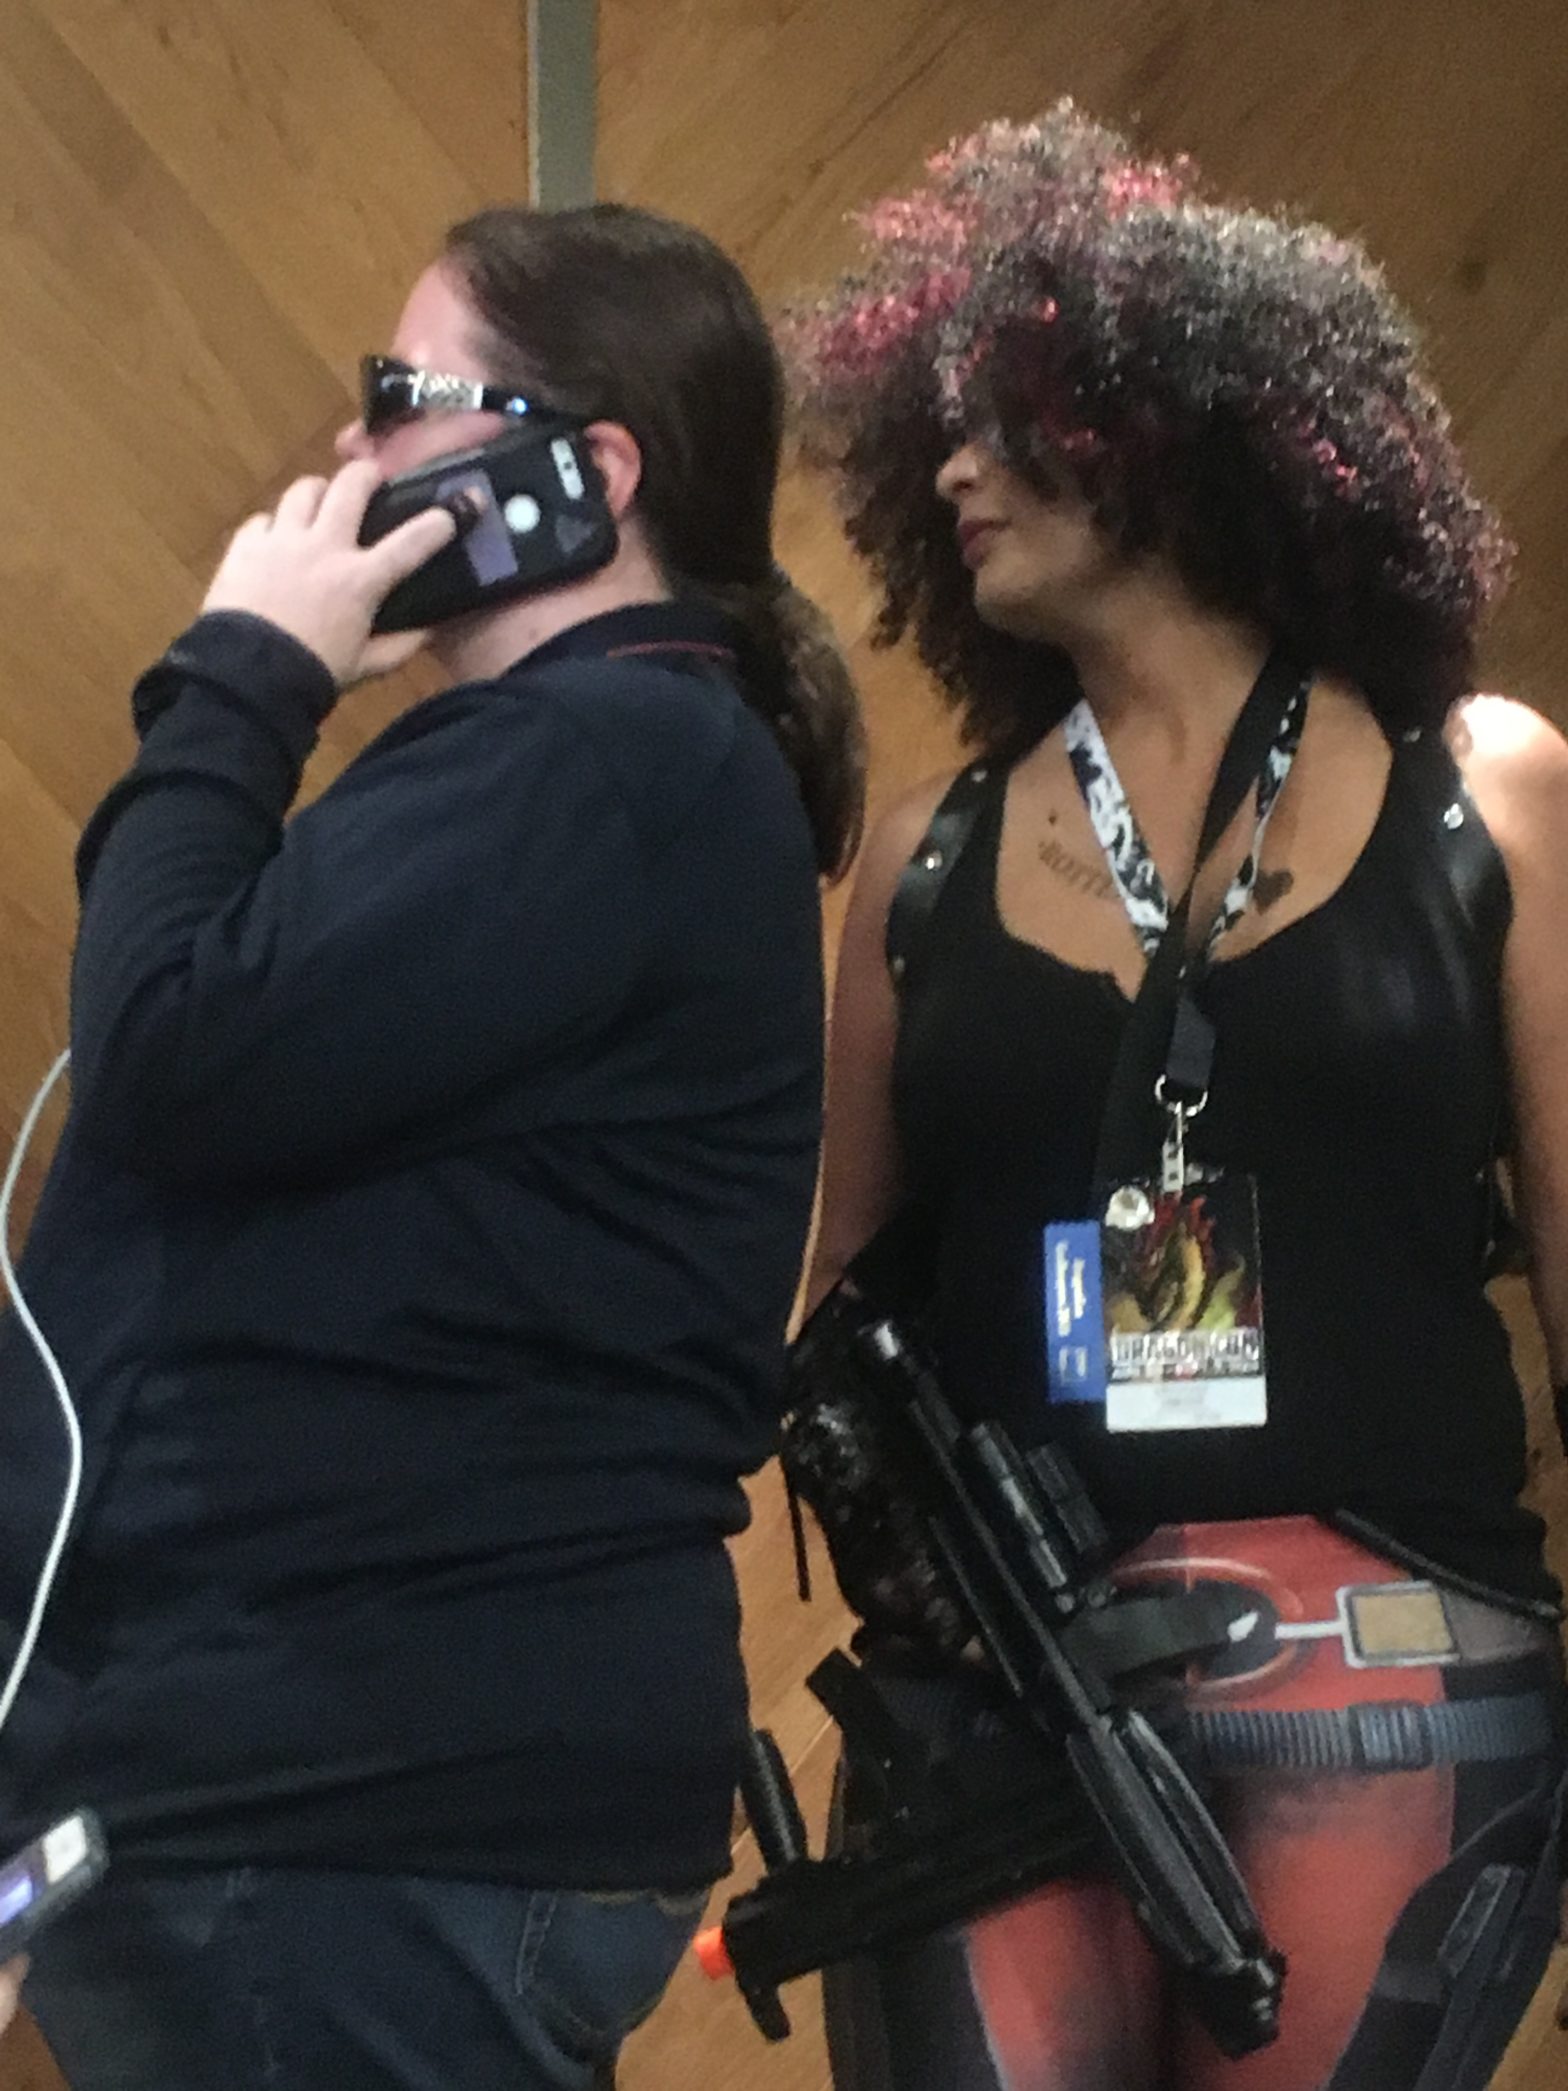 Big Shiny Robot Interview with “BBQ Becky” of Dragon Con